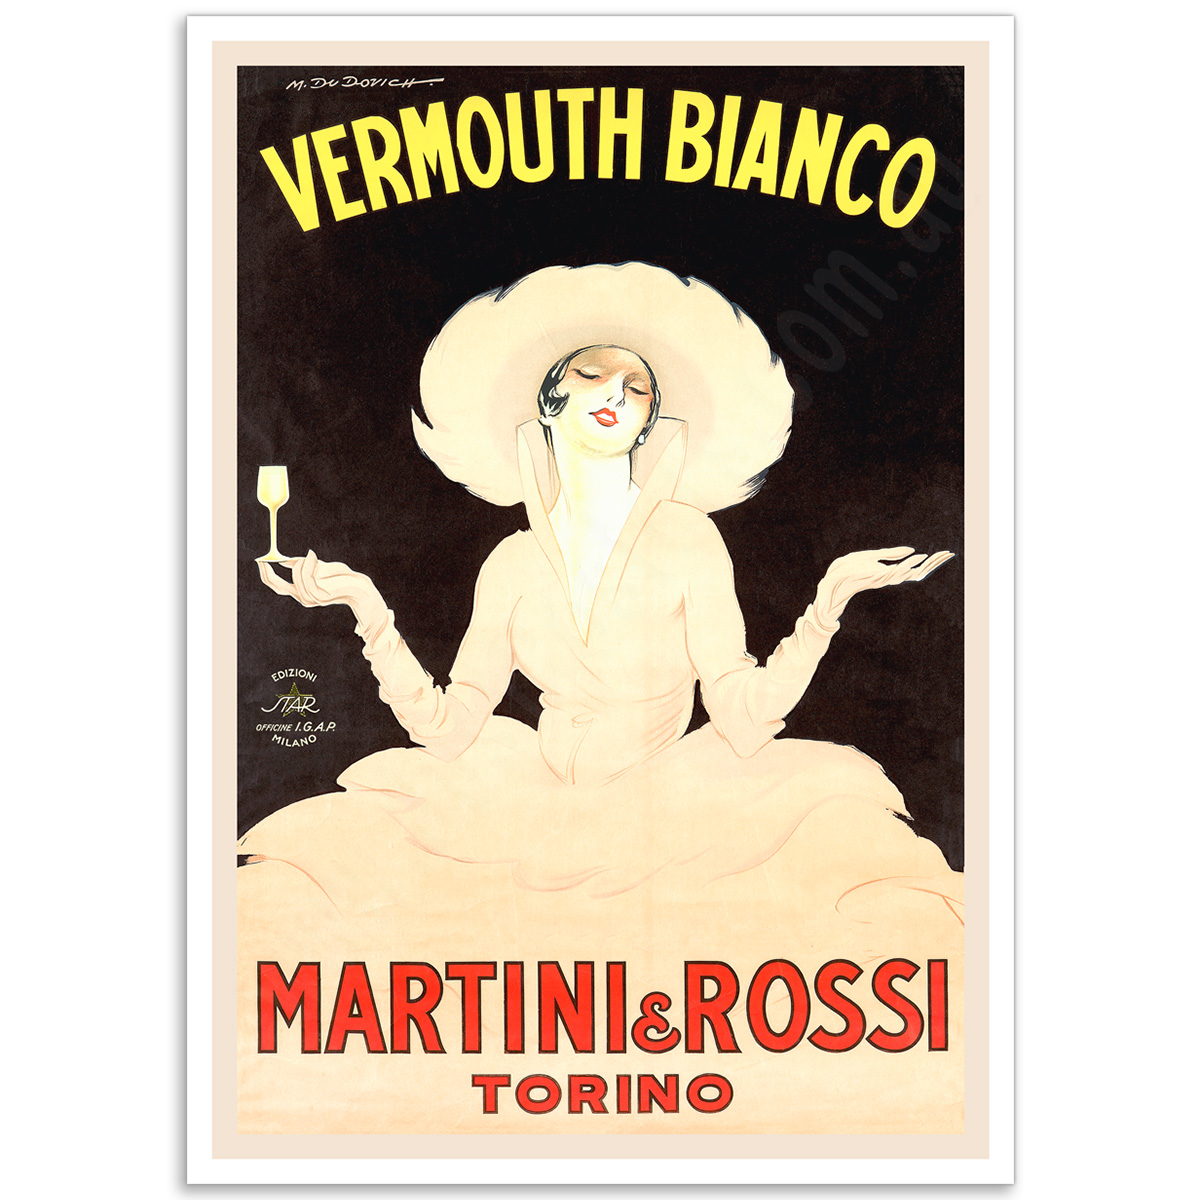 Vintage Italian Promotional Poster - White-Lady Martini Rossi